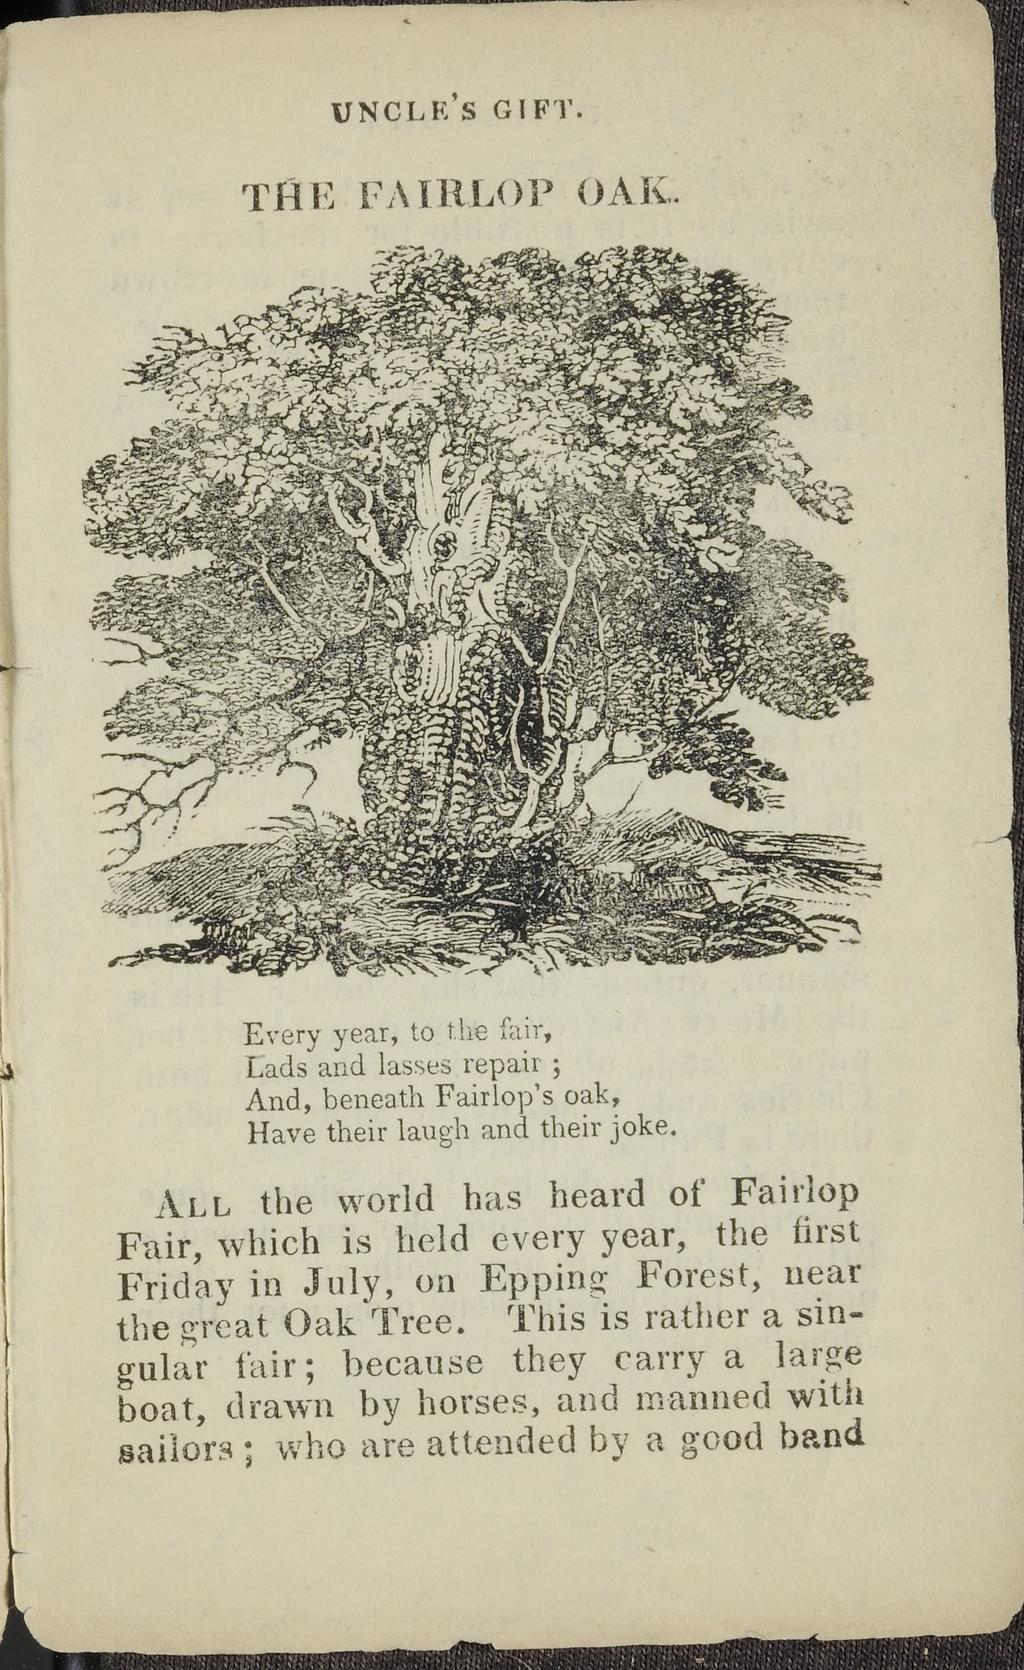 UNCLE S GIFT. TH E FAIRLOP OAK. Every year, to the fair, Lads and lasses repair ; And, beneath Fair lop s oak, Have their laugh and their joke.